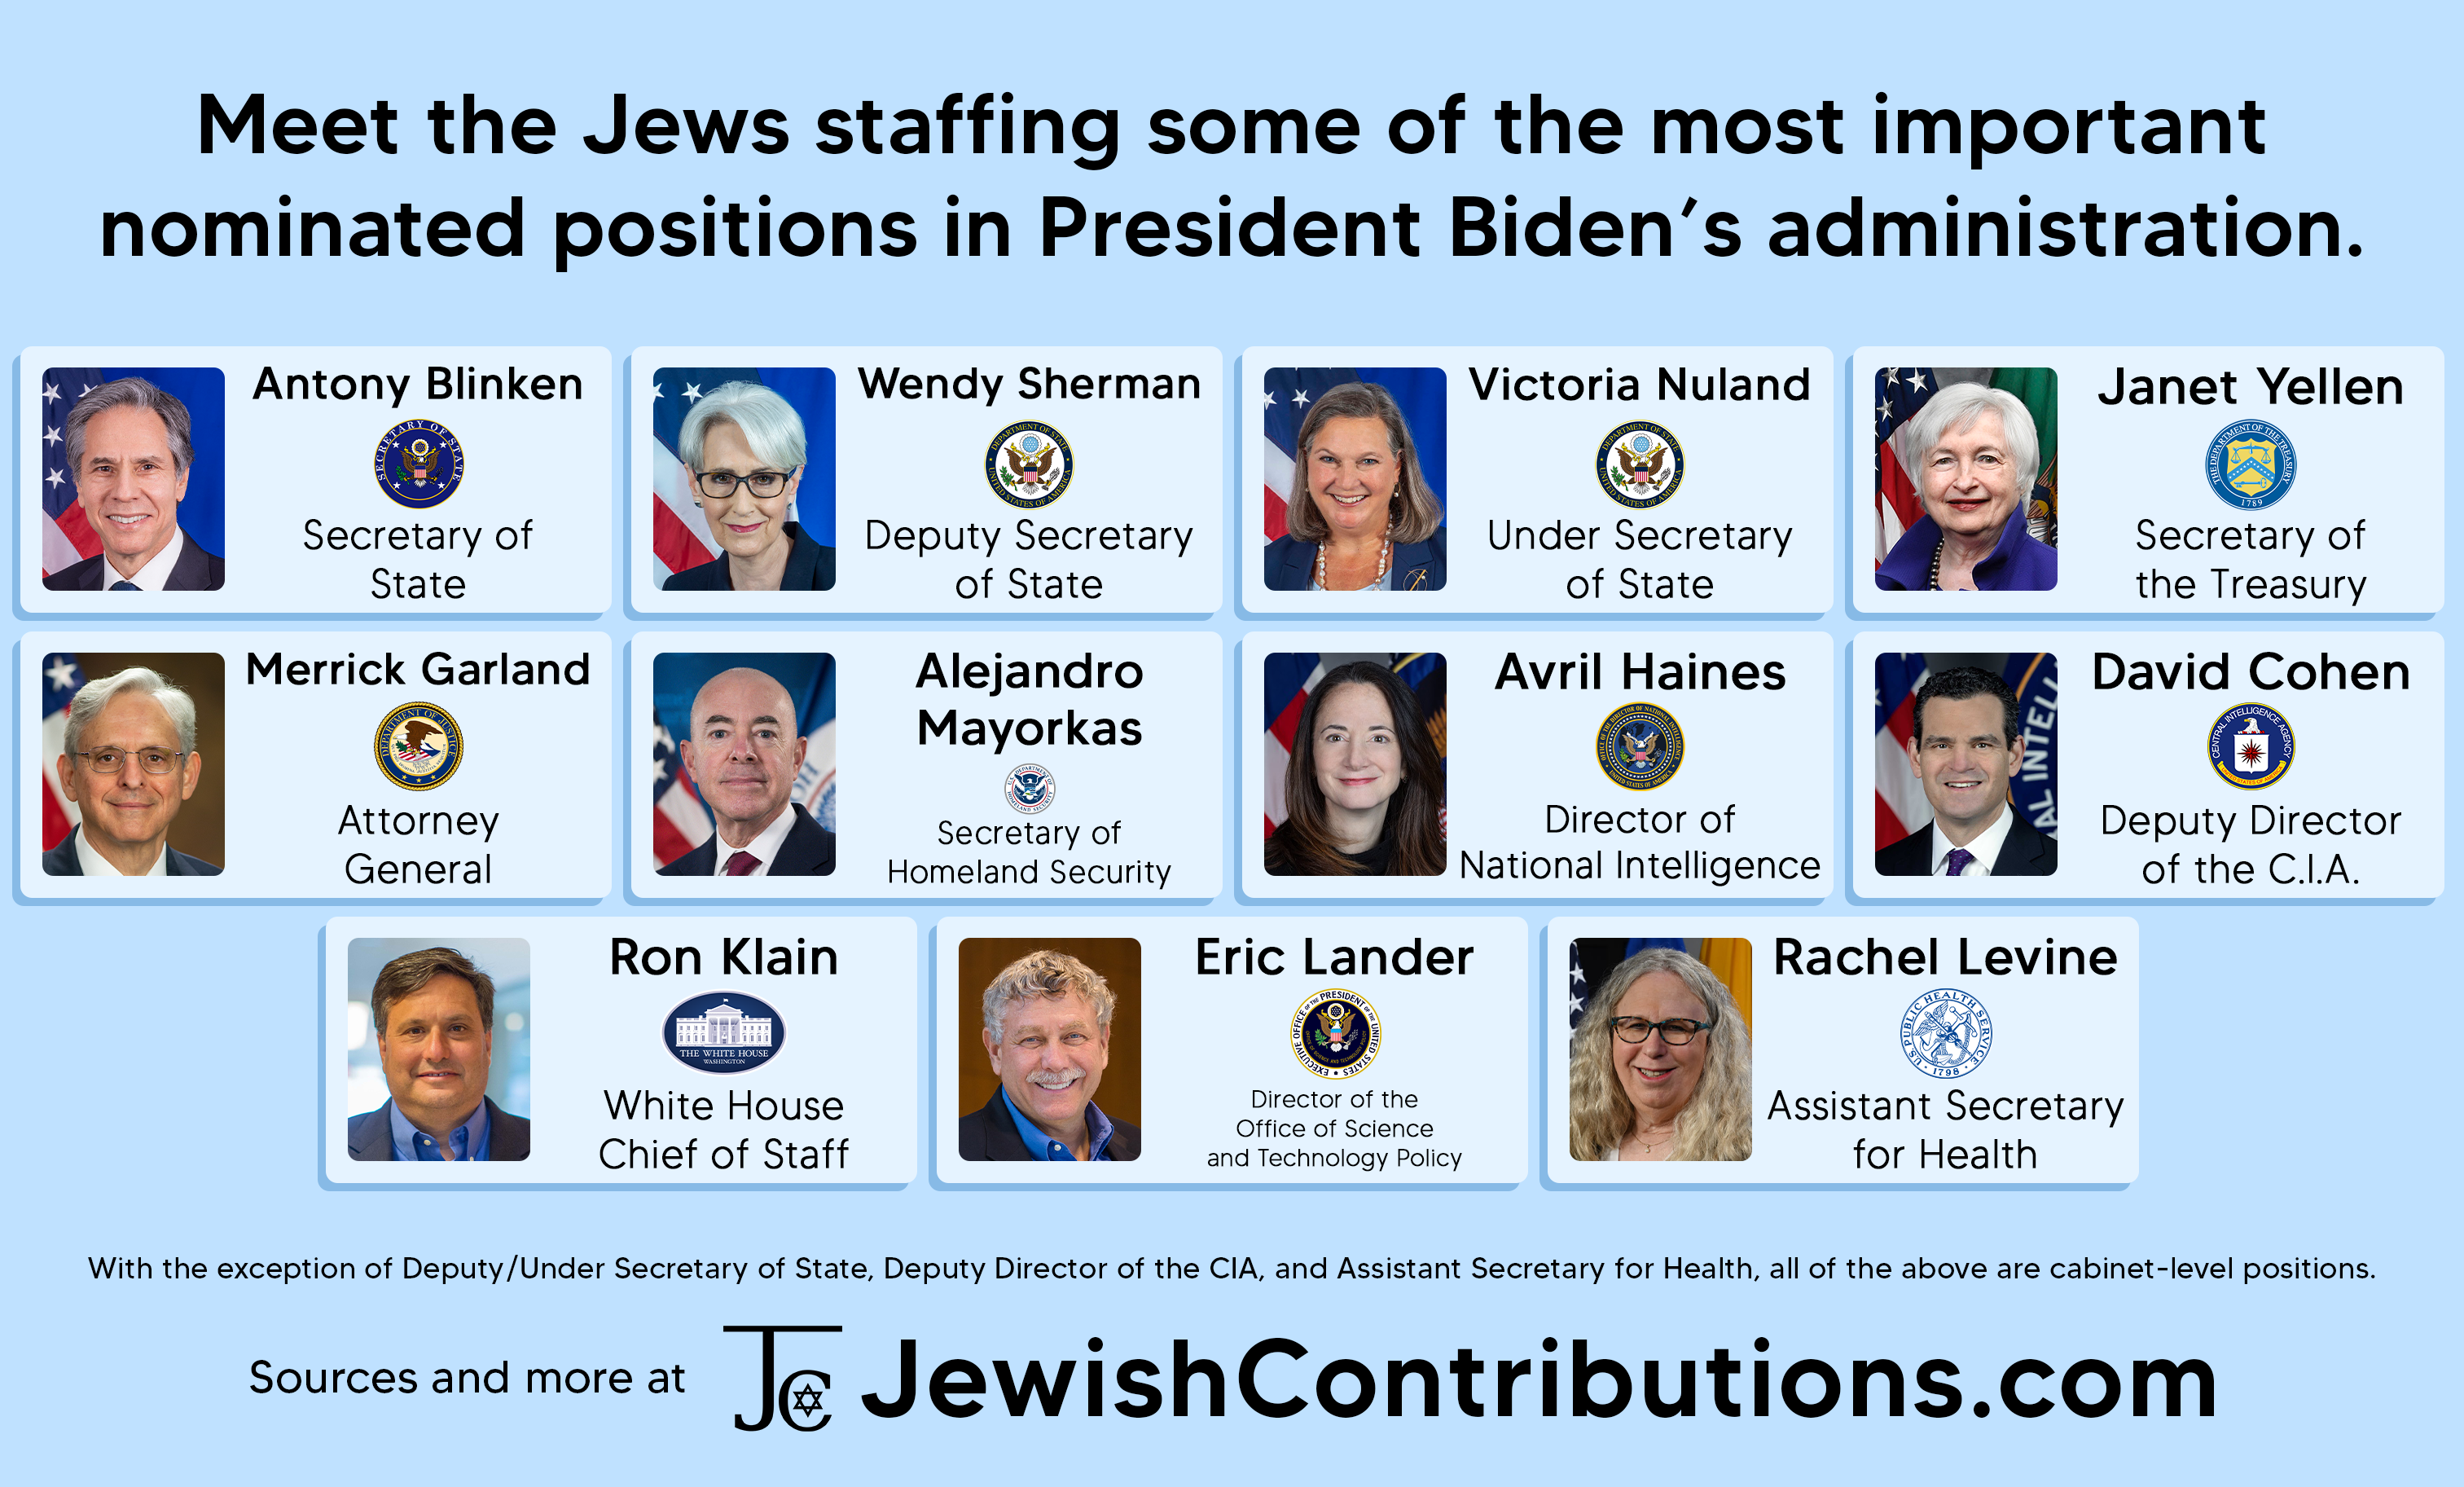 Meet the Jews staffing some of the most important nominated positions in President Biden's administration.